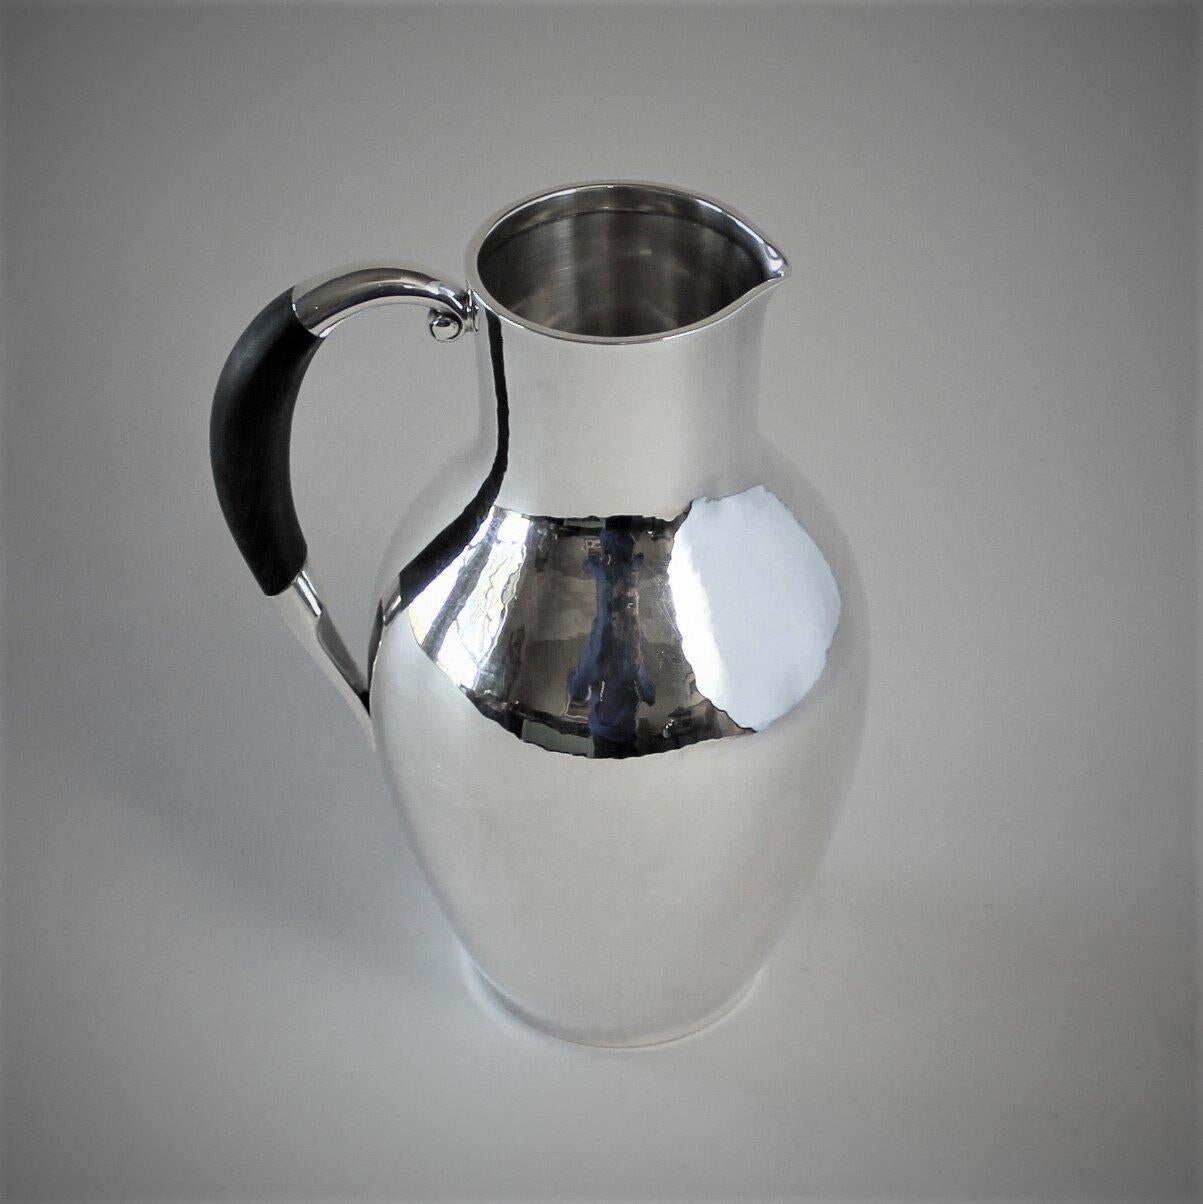 Georg Jensen sterling silver pitcher with ebony handle, No.743 by Johan Rohde

A similar example can be seen in the book Georg Jensen Holloware, The Silver Fund Collection by David Taylor and Jason Laskey, pg 248.

Designer: Johan Rohde
 Maker: